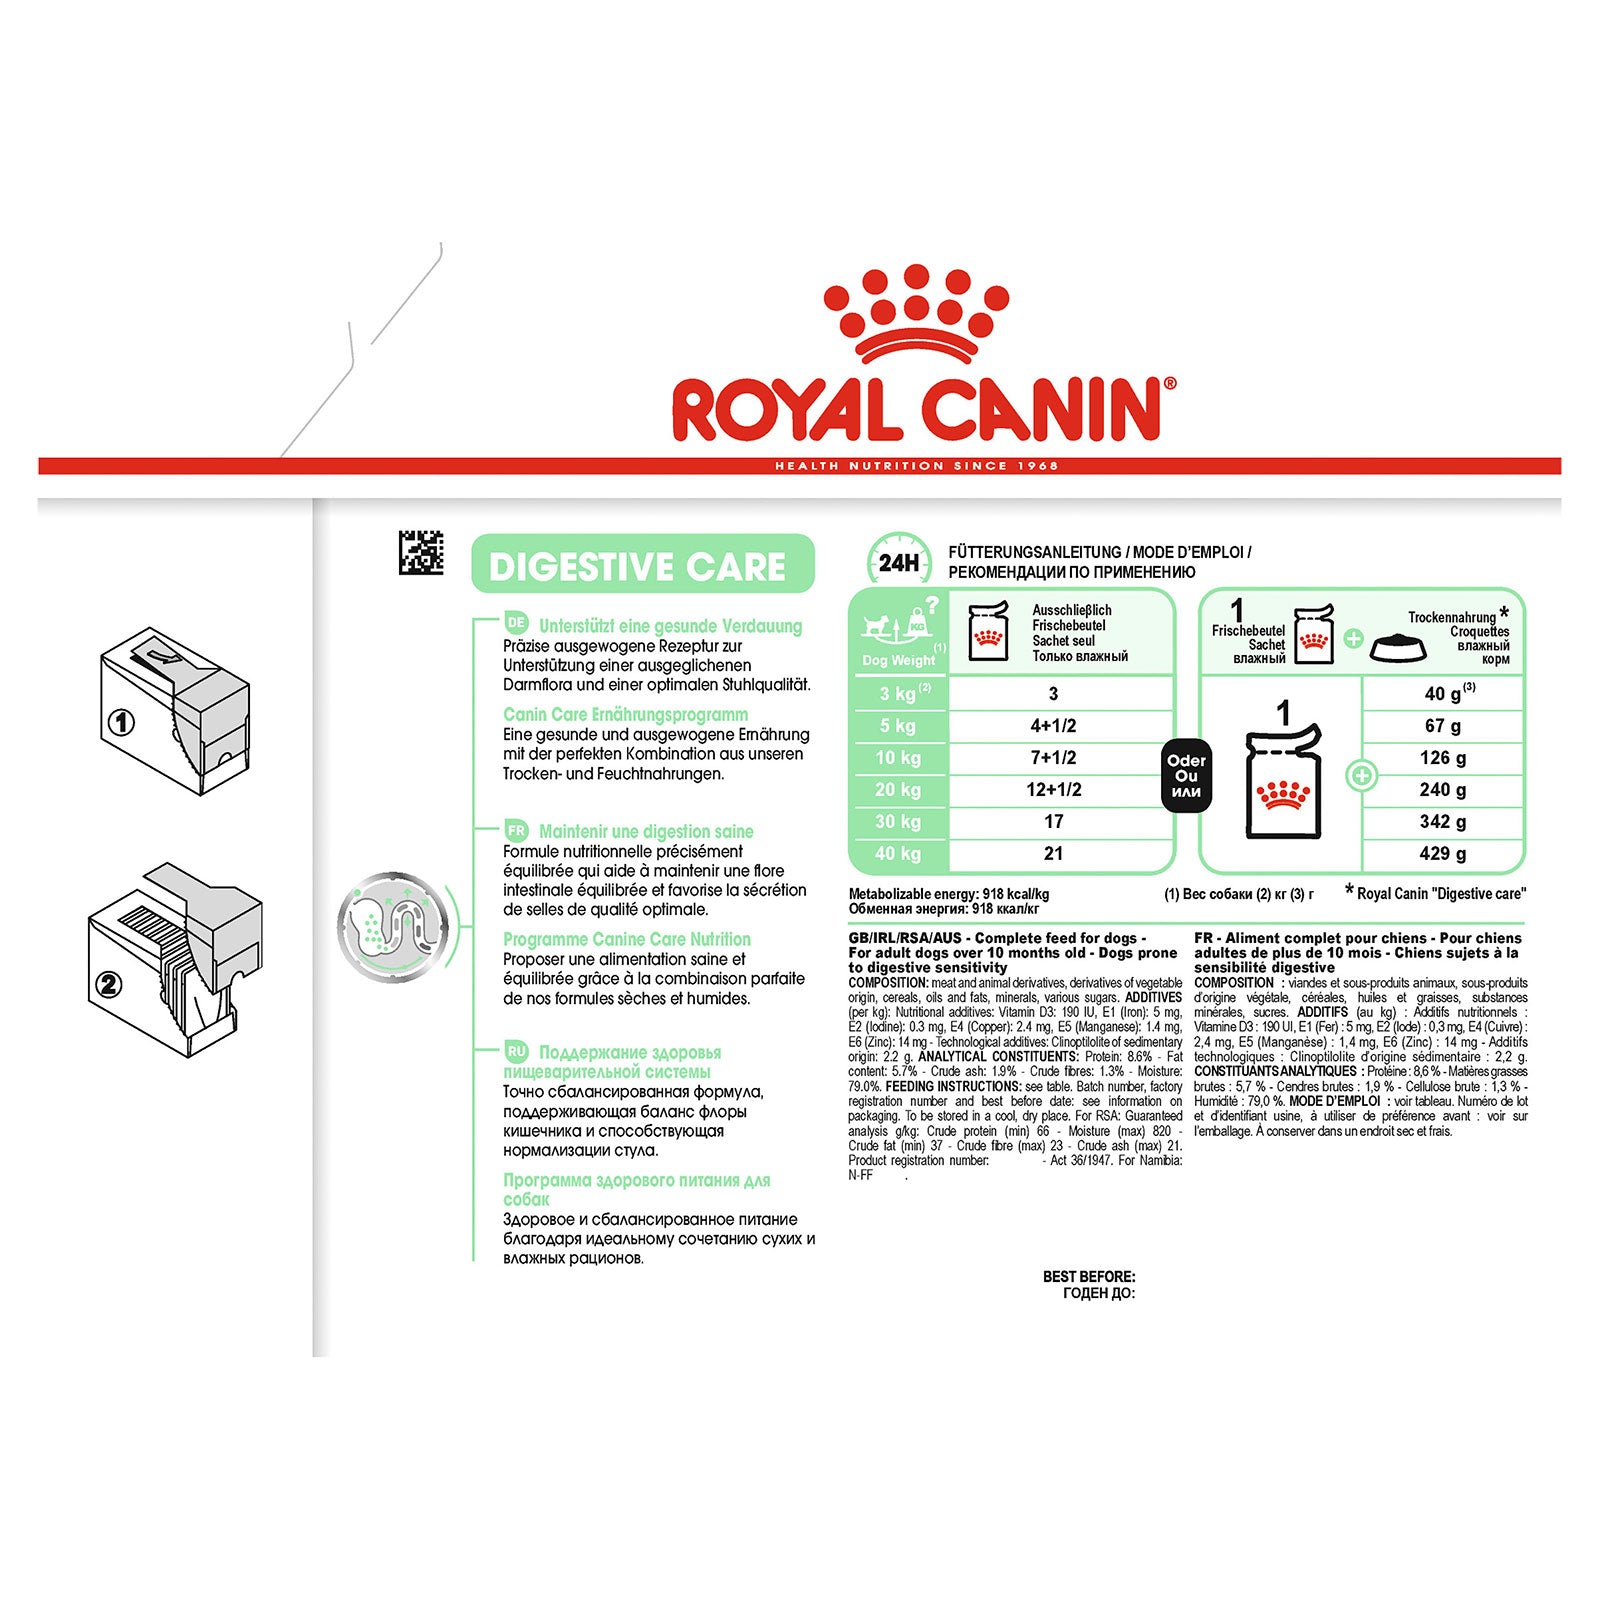 Royal Canin Dog Food Pouch Digestive Care